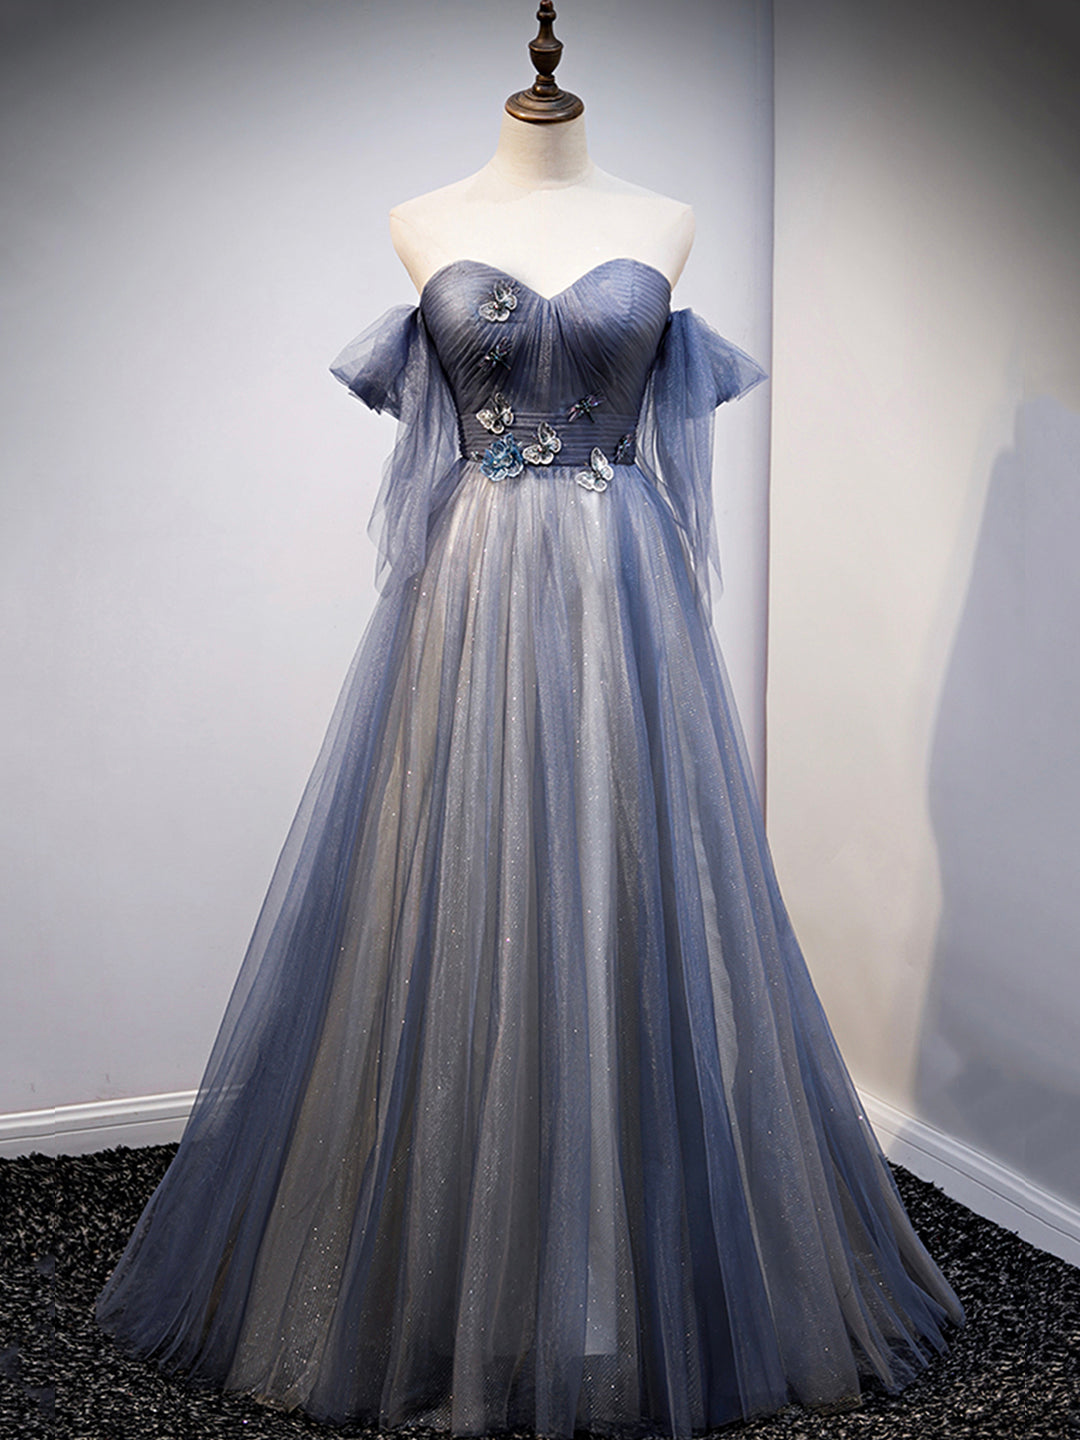 Party Dresses Idea, Blue Sweetheart Tulle with Lace Party Dress, Blue Long Formal Dress